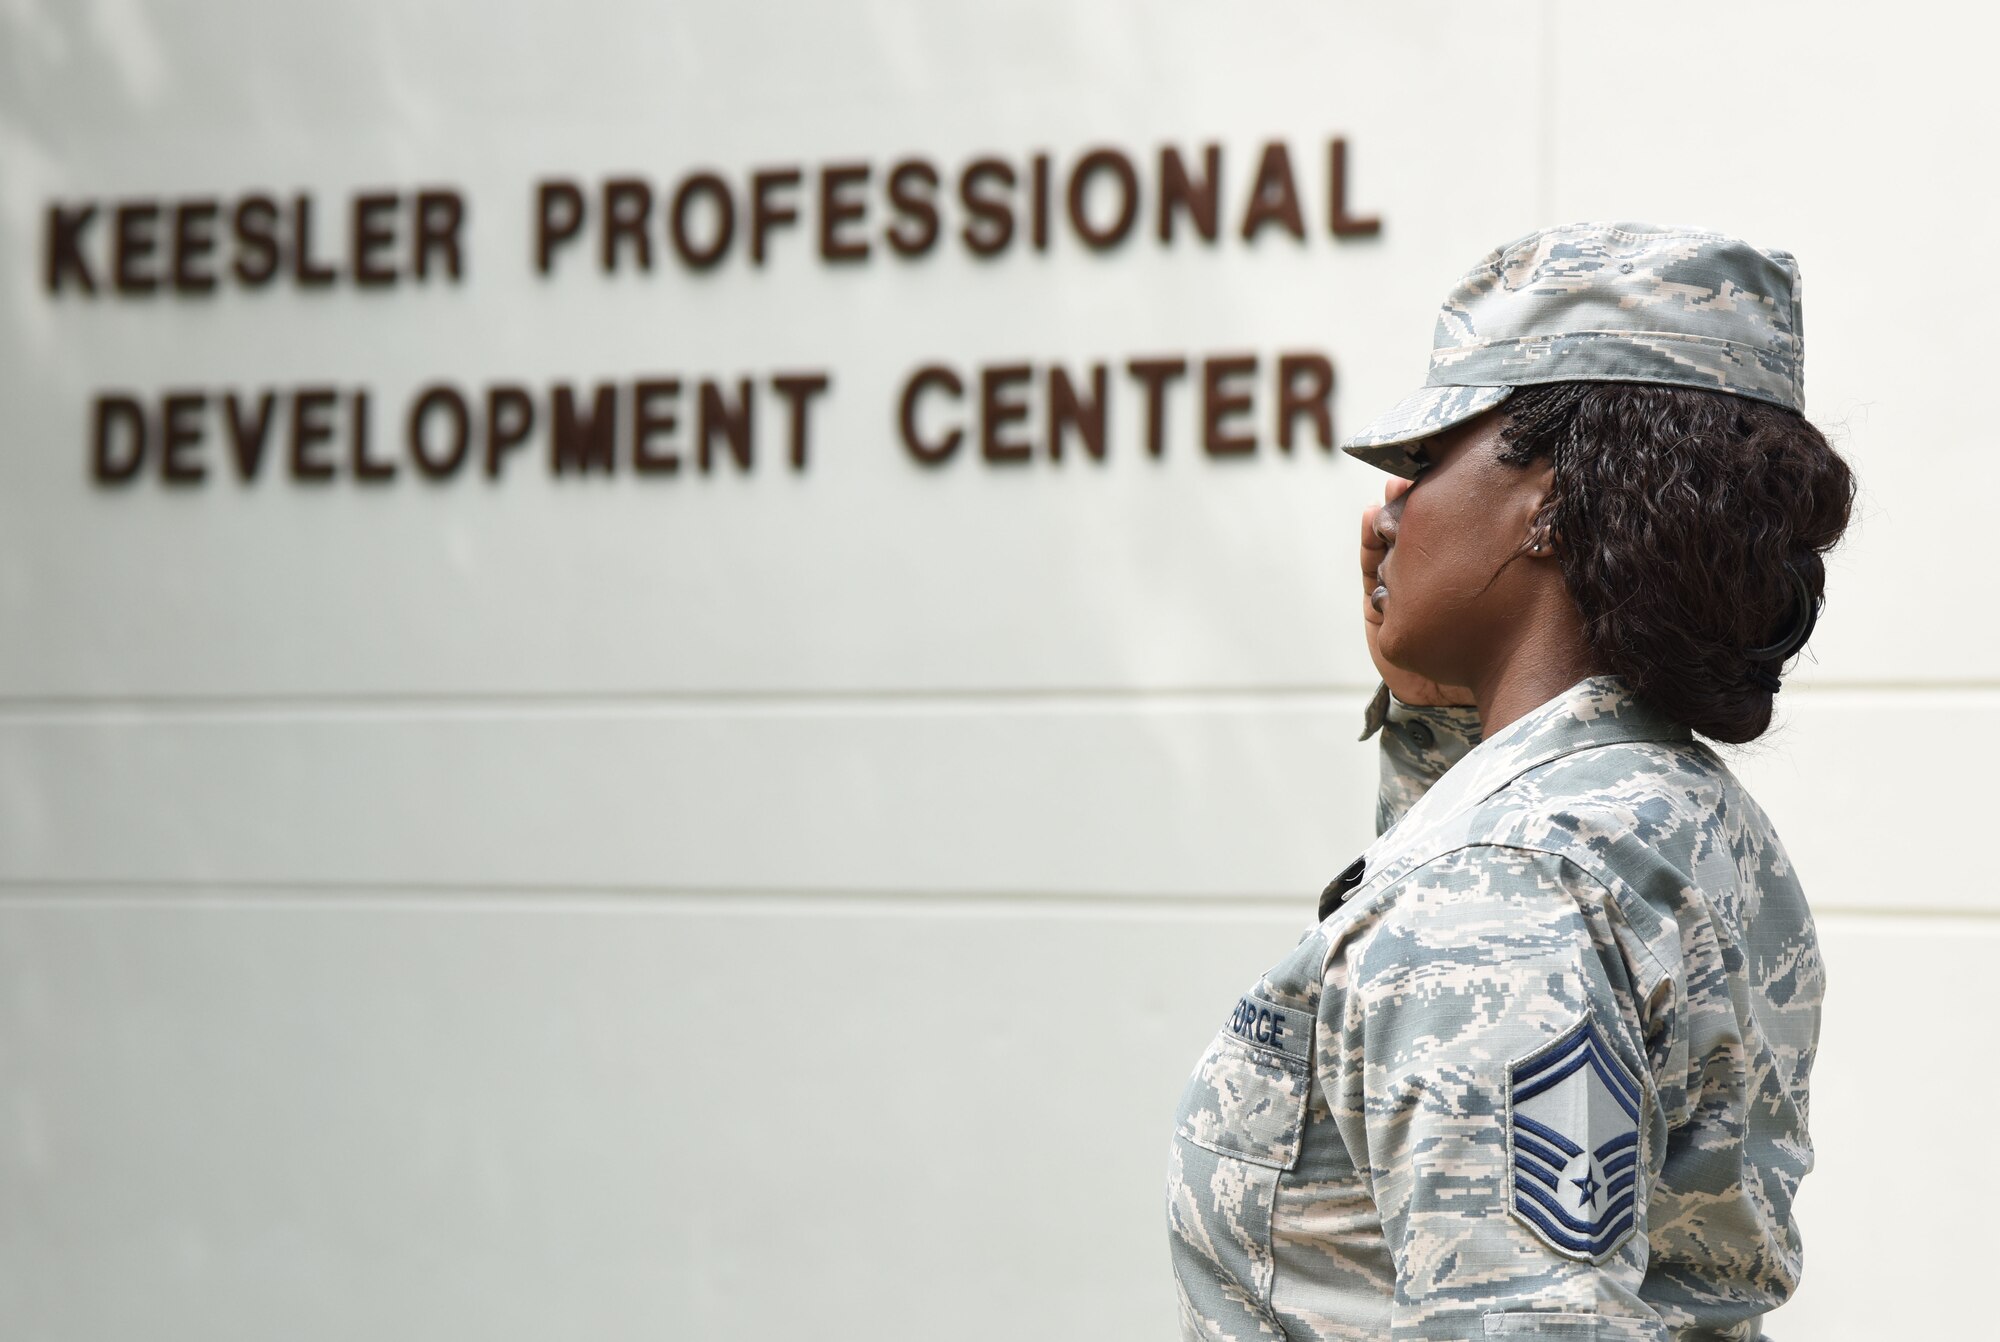 Senior Master Sgt. Tiffany Patterson, 81st Force Support Squadron career assistance advisor, renders a salute during the national anthem at the Professional Development Center’s grand reopening and ribbon cutting ceremony May 17, 2017, on Keesler Air Force Base, Miss. The renovated facility offers developmental opportunities and various courses that fit the needs of officers, enlisted, civilians and reservists. (U.S. Air Force photo by Kemberly Groue)